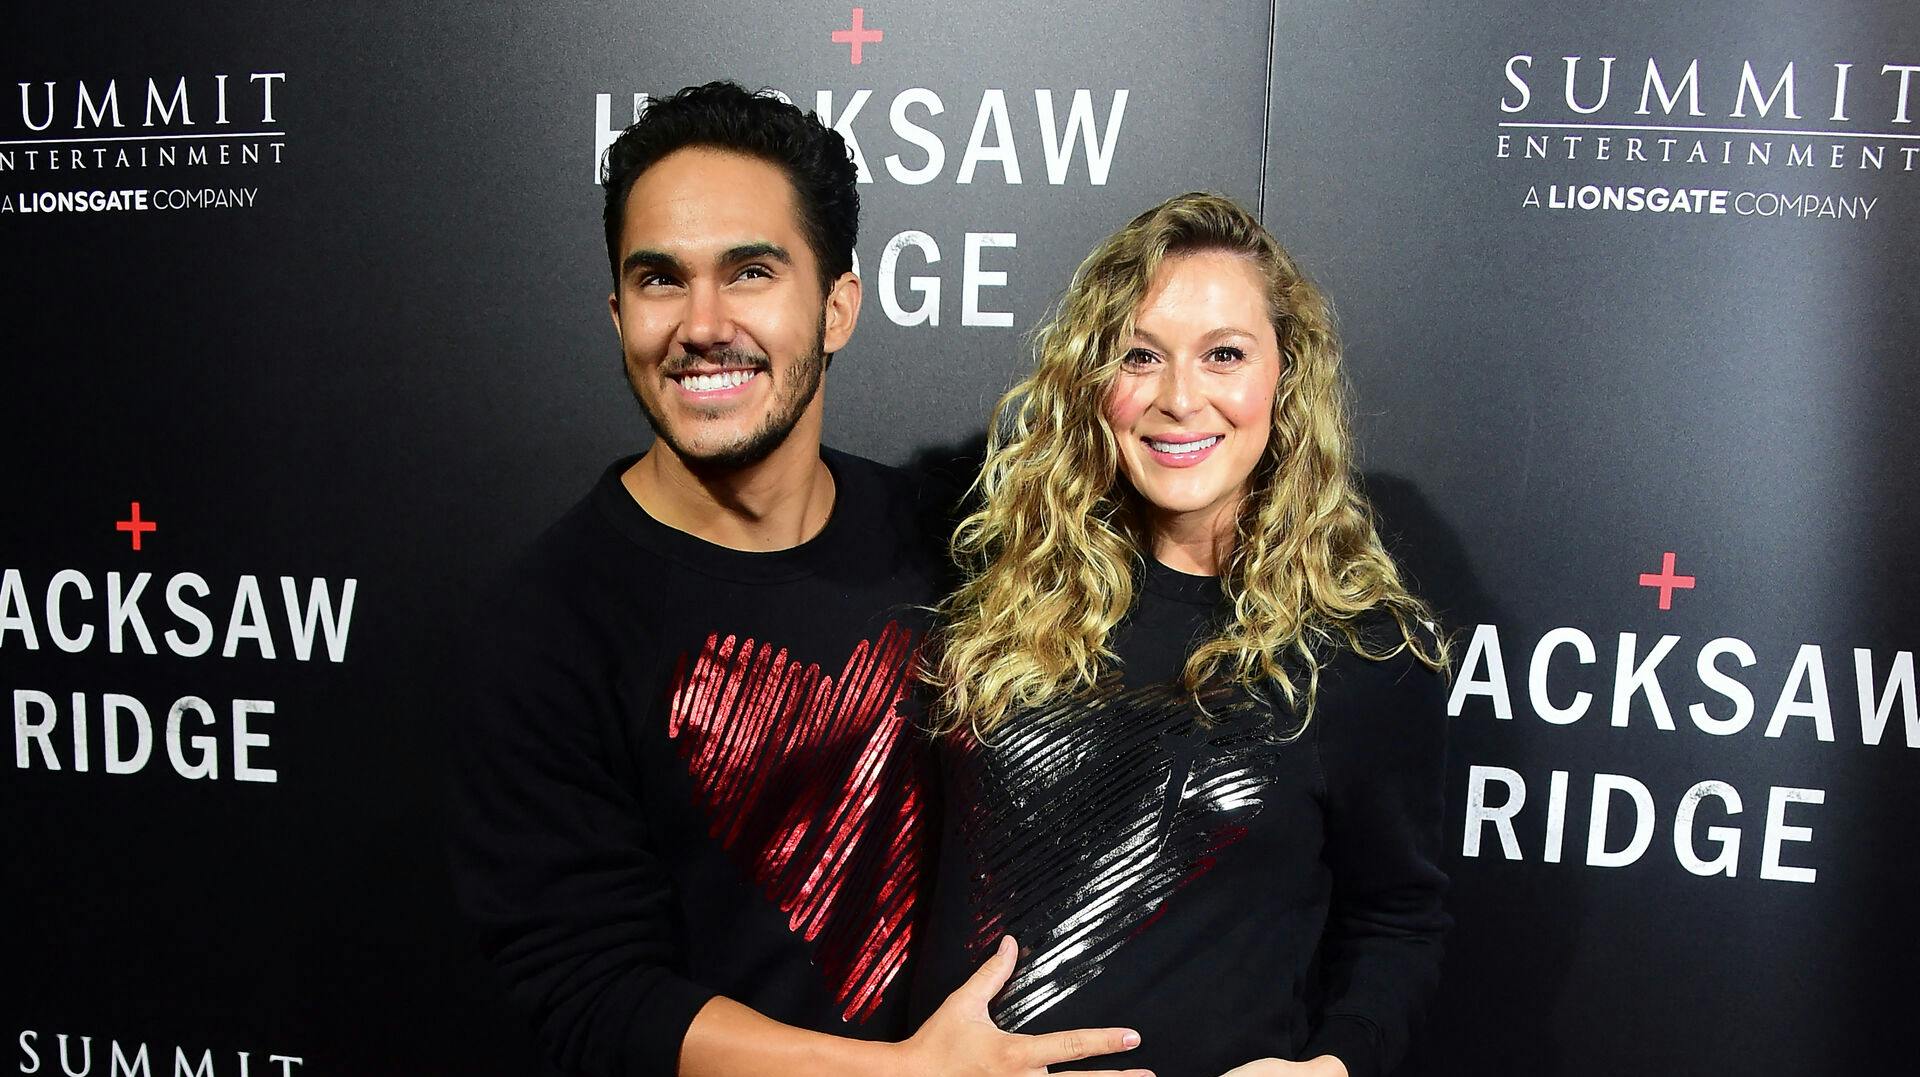 Carlos and Alexa Penavega pose on arrival for the Los Angeles special screening of the film 'Hacksaw Ridge' at the Samuel Goldwyn Theater in Beverly Hills, California on October 24, 2016. . Frederic J. BROWN / AFP